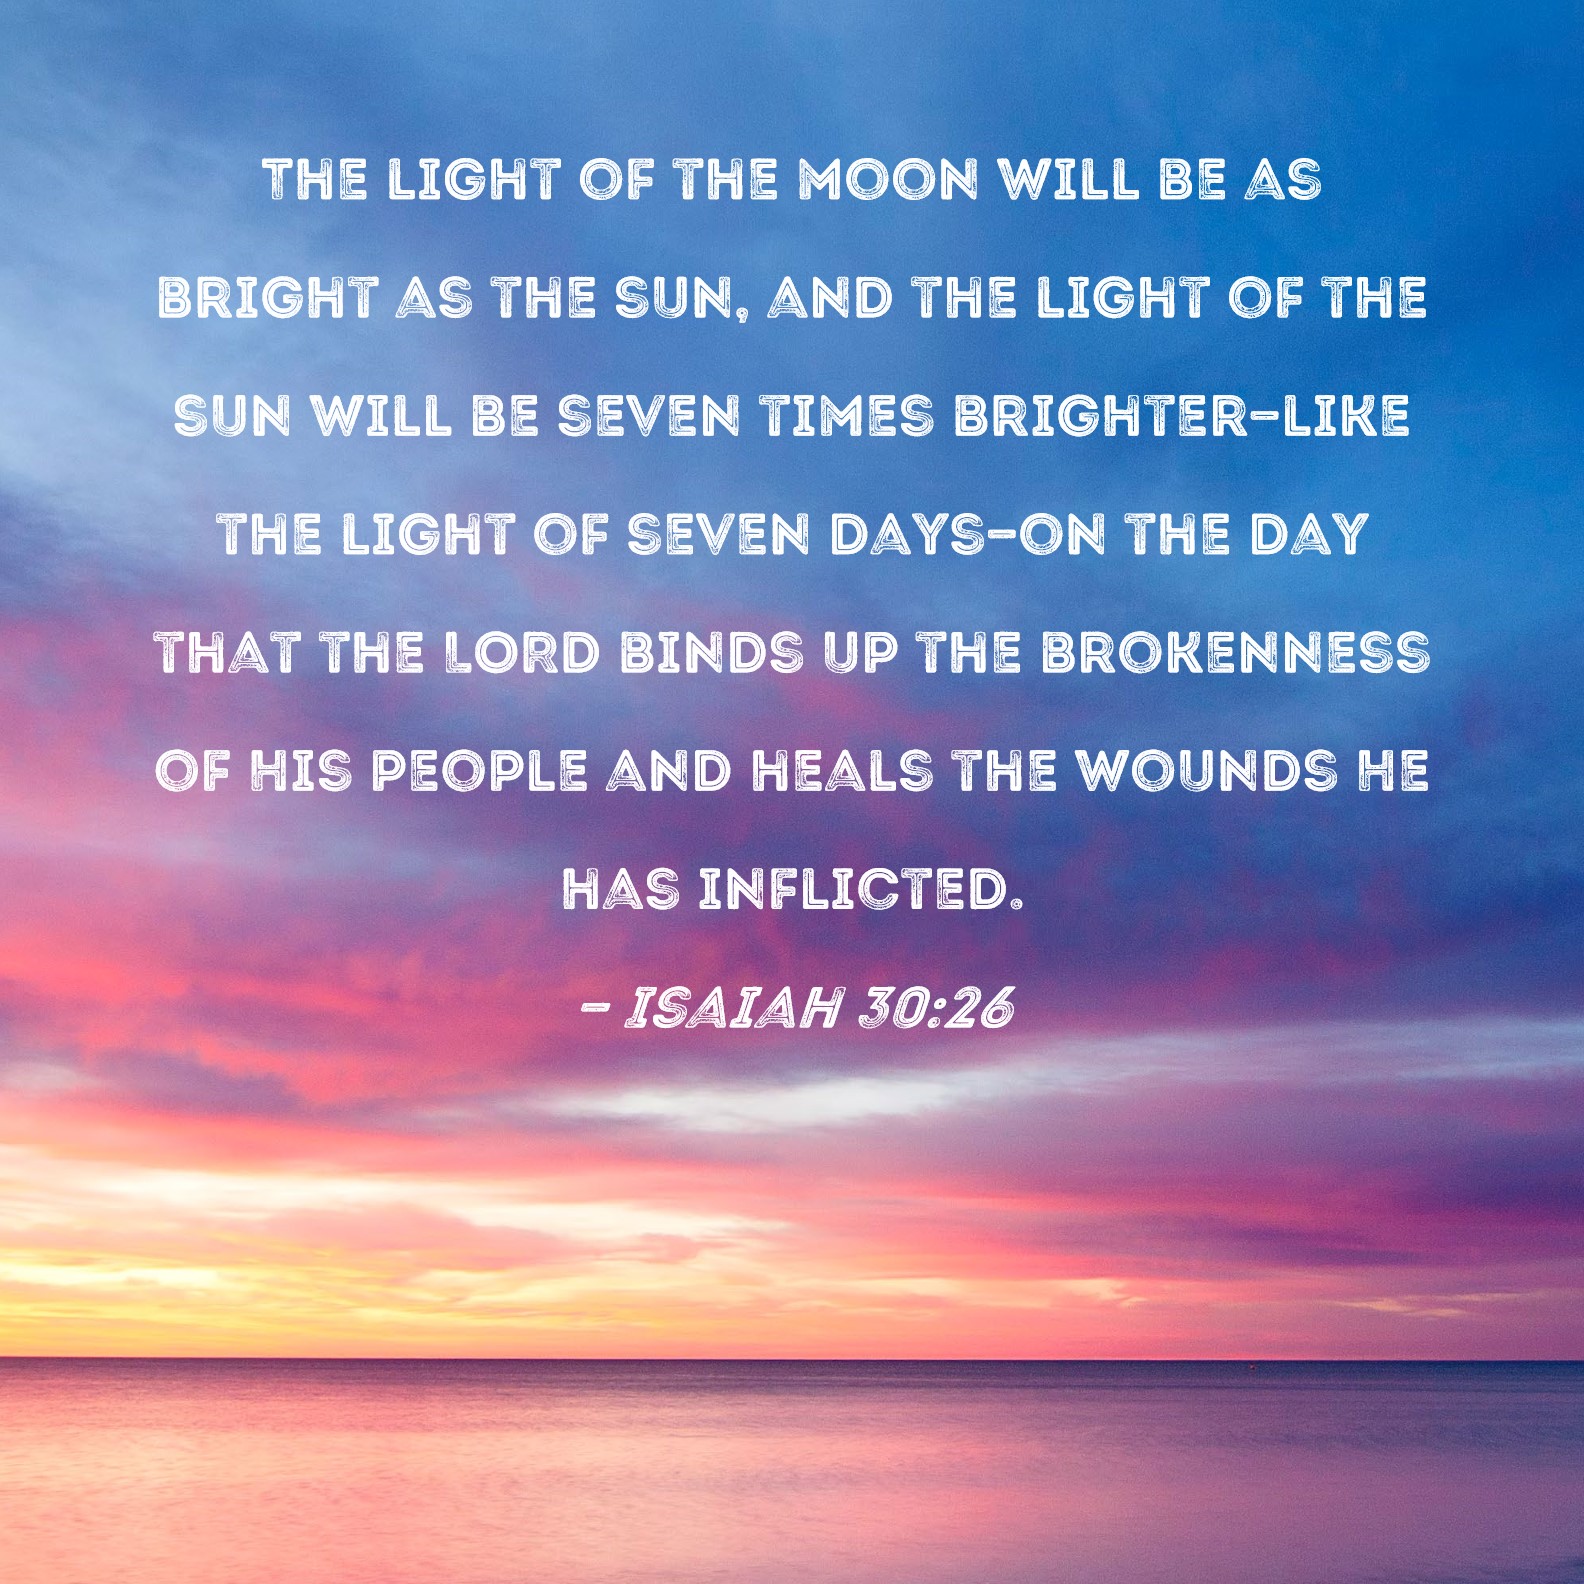 Isaiah 30:26 The light of the moon will be as bright as the sun, and the  light of the sun will be seven times brighter--like the light of seven  days--on the day